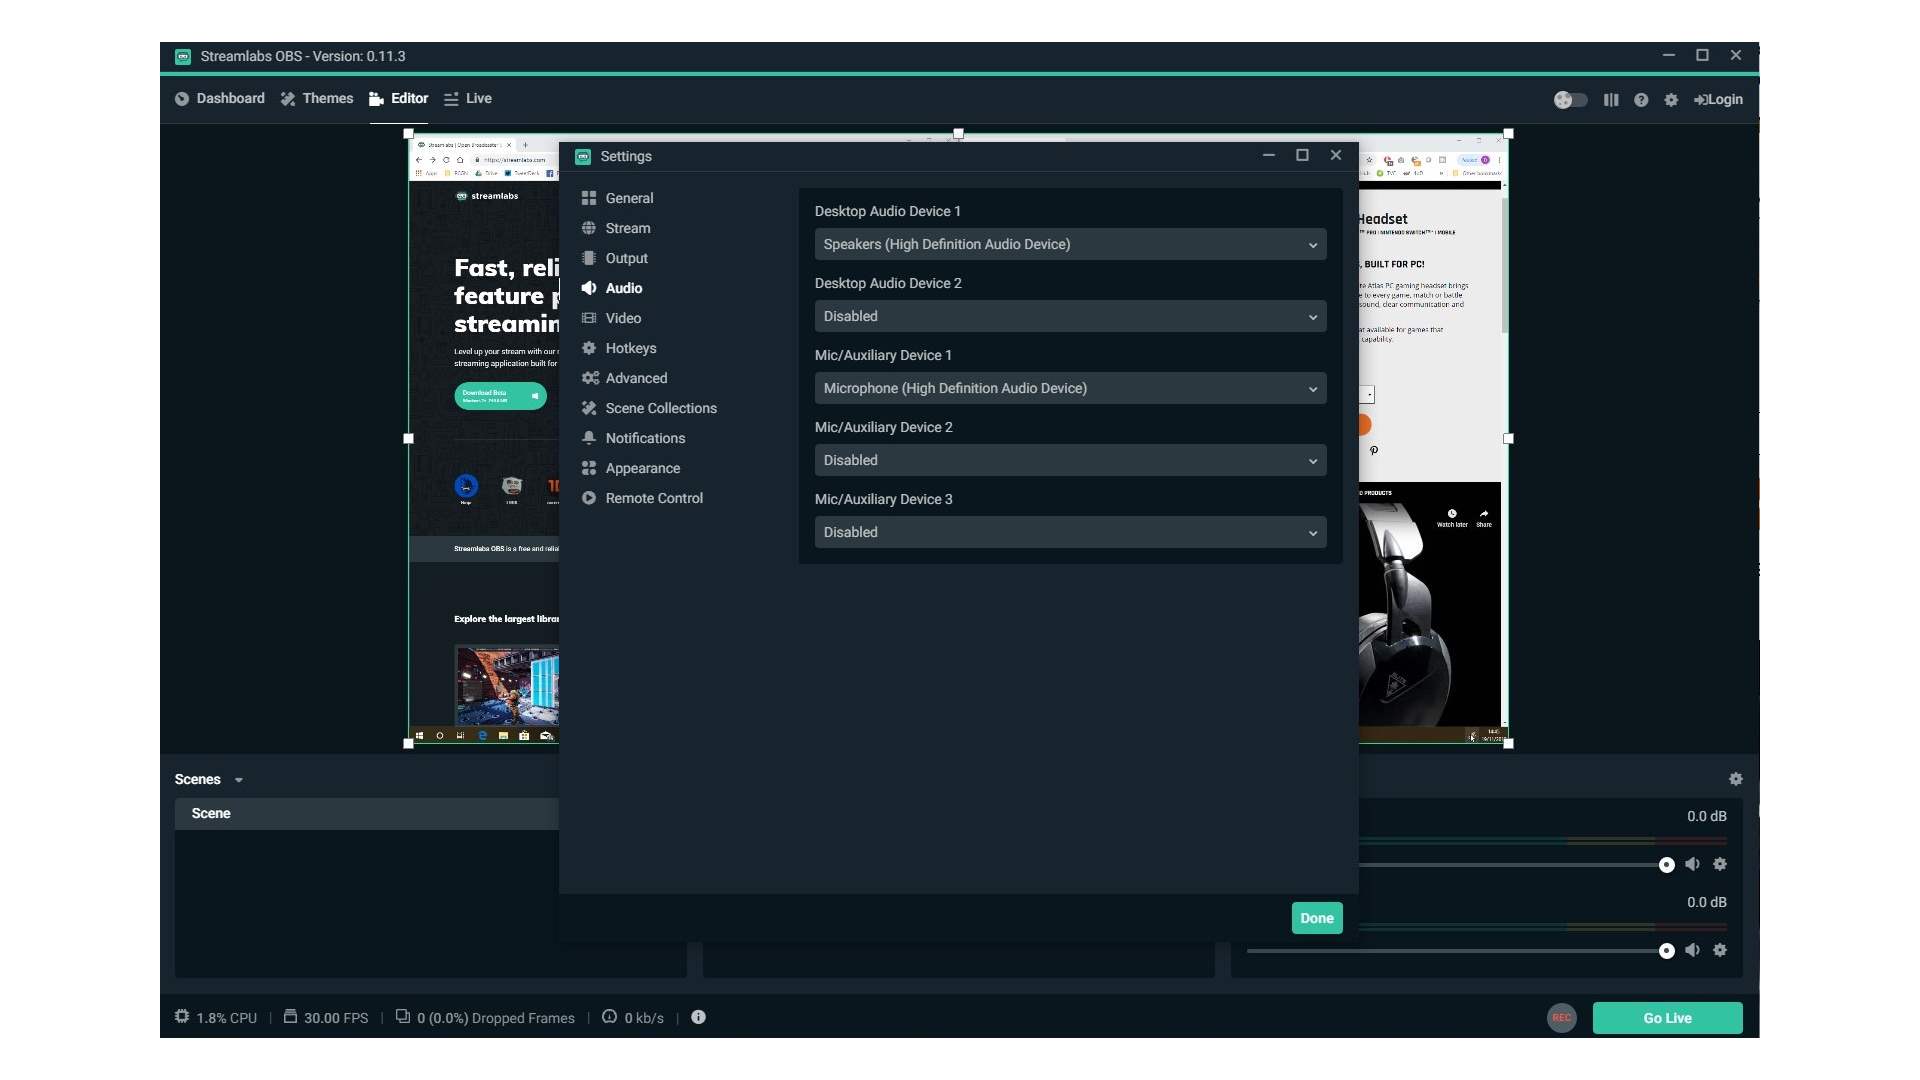 Add Tidal Music to Streamlabs OBS